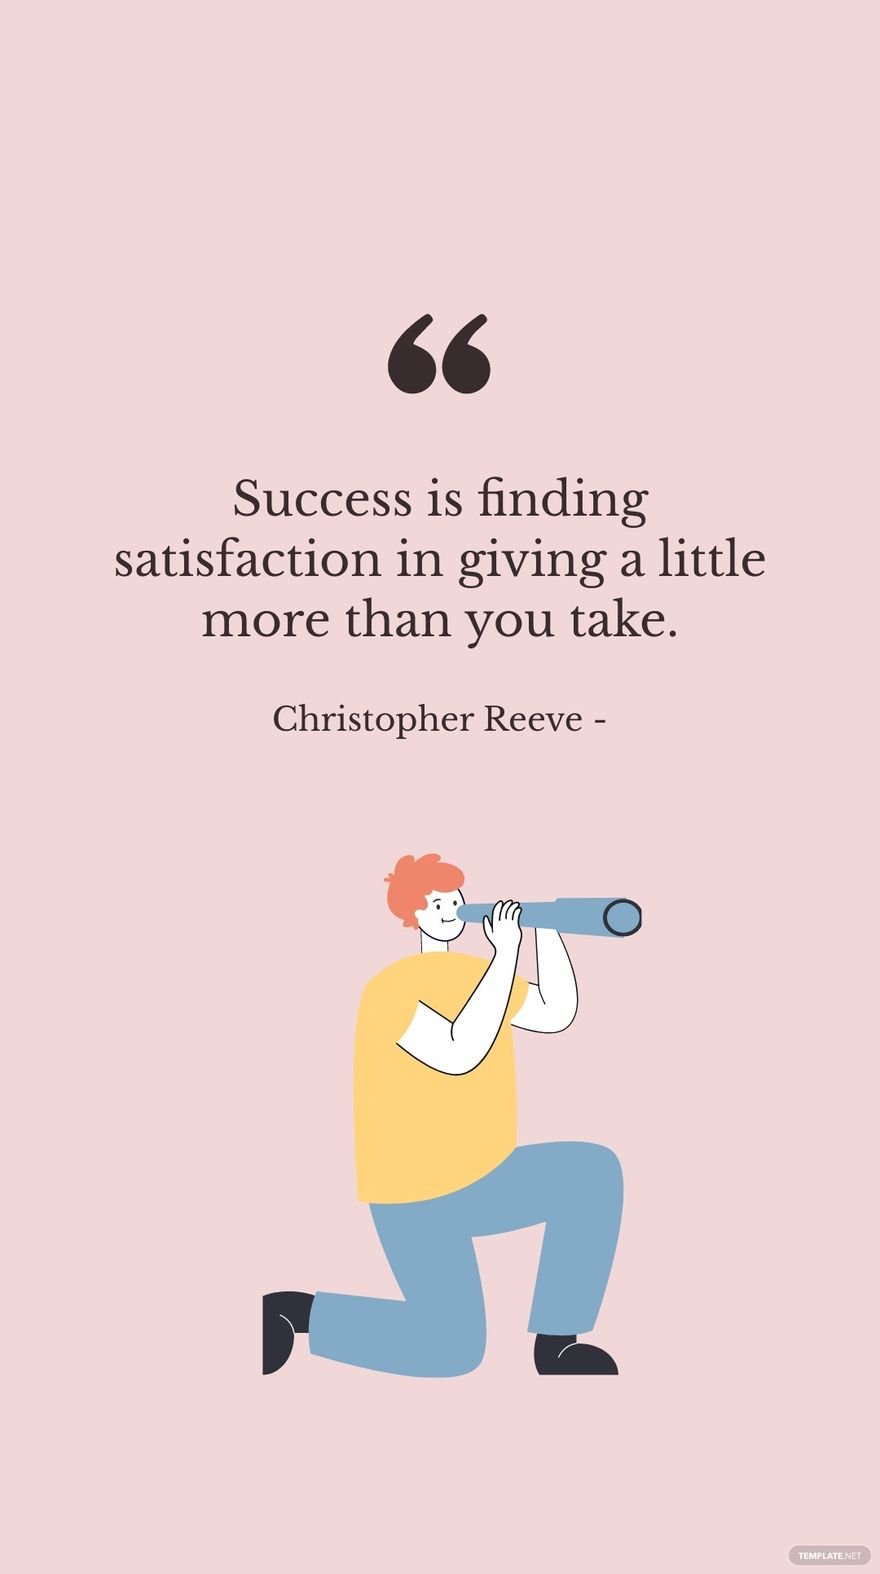 Christopher Reeve - Success is finding satisfaction in giving a little more than you take.